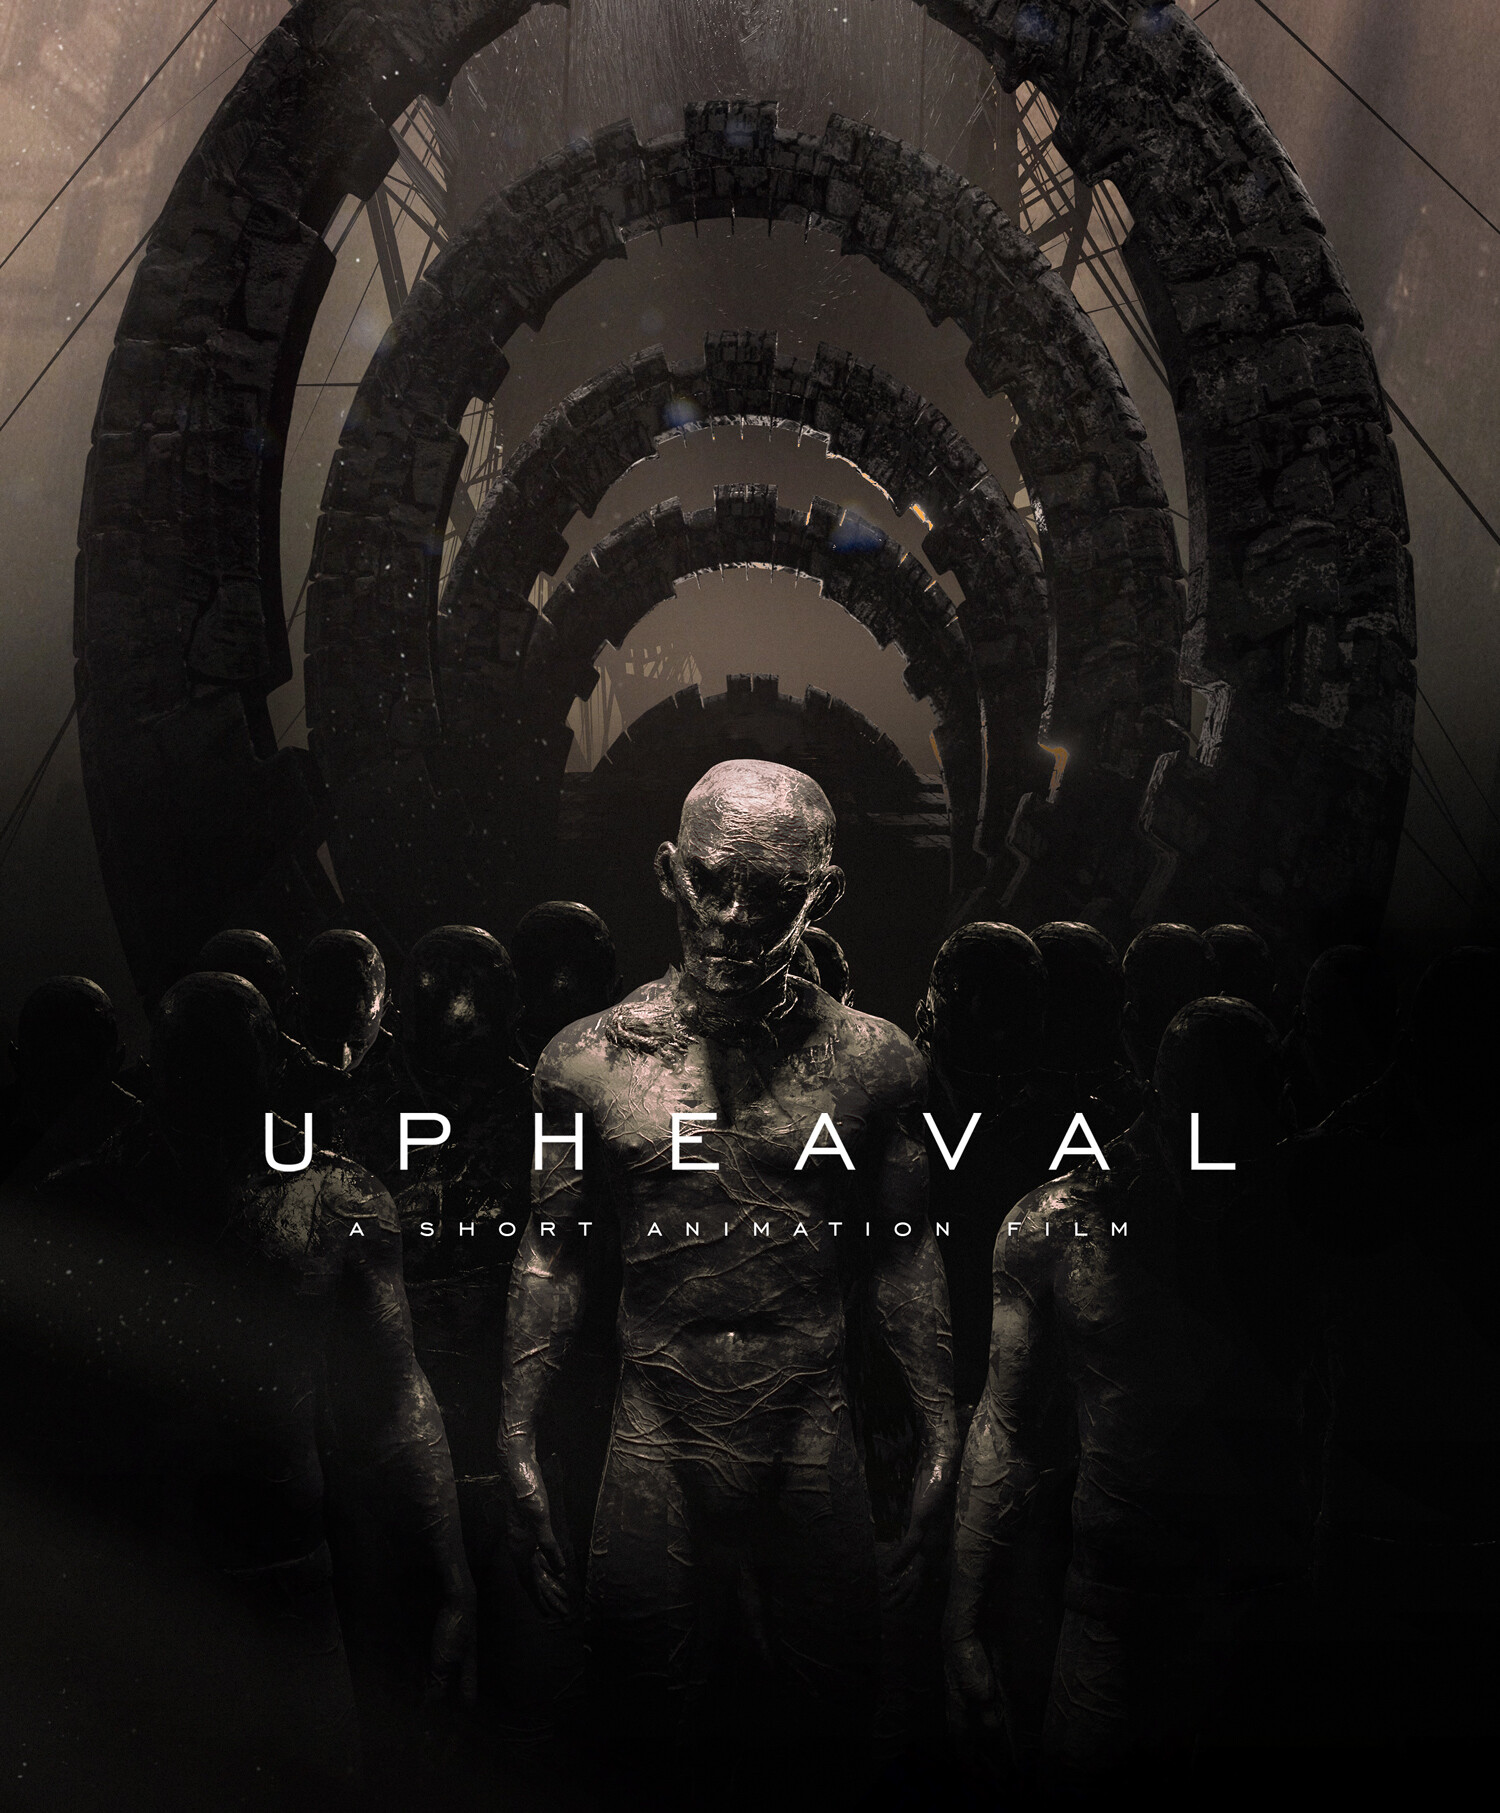 Upheaval | cosmic horror | short animation film - Finished Projects -  Blender Artists Community